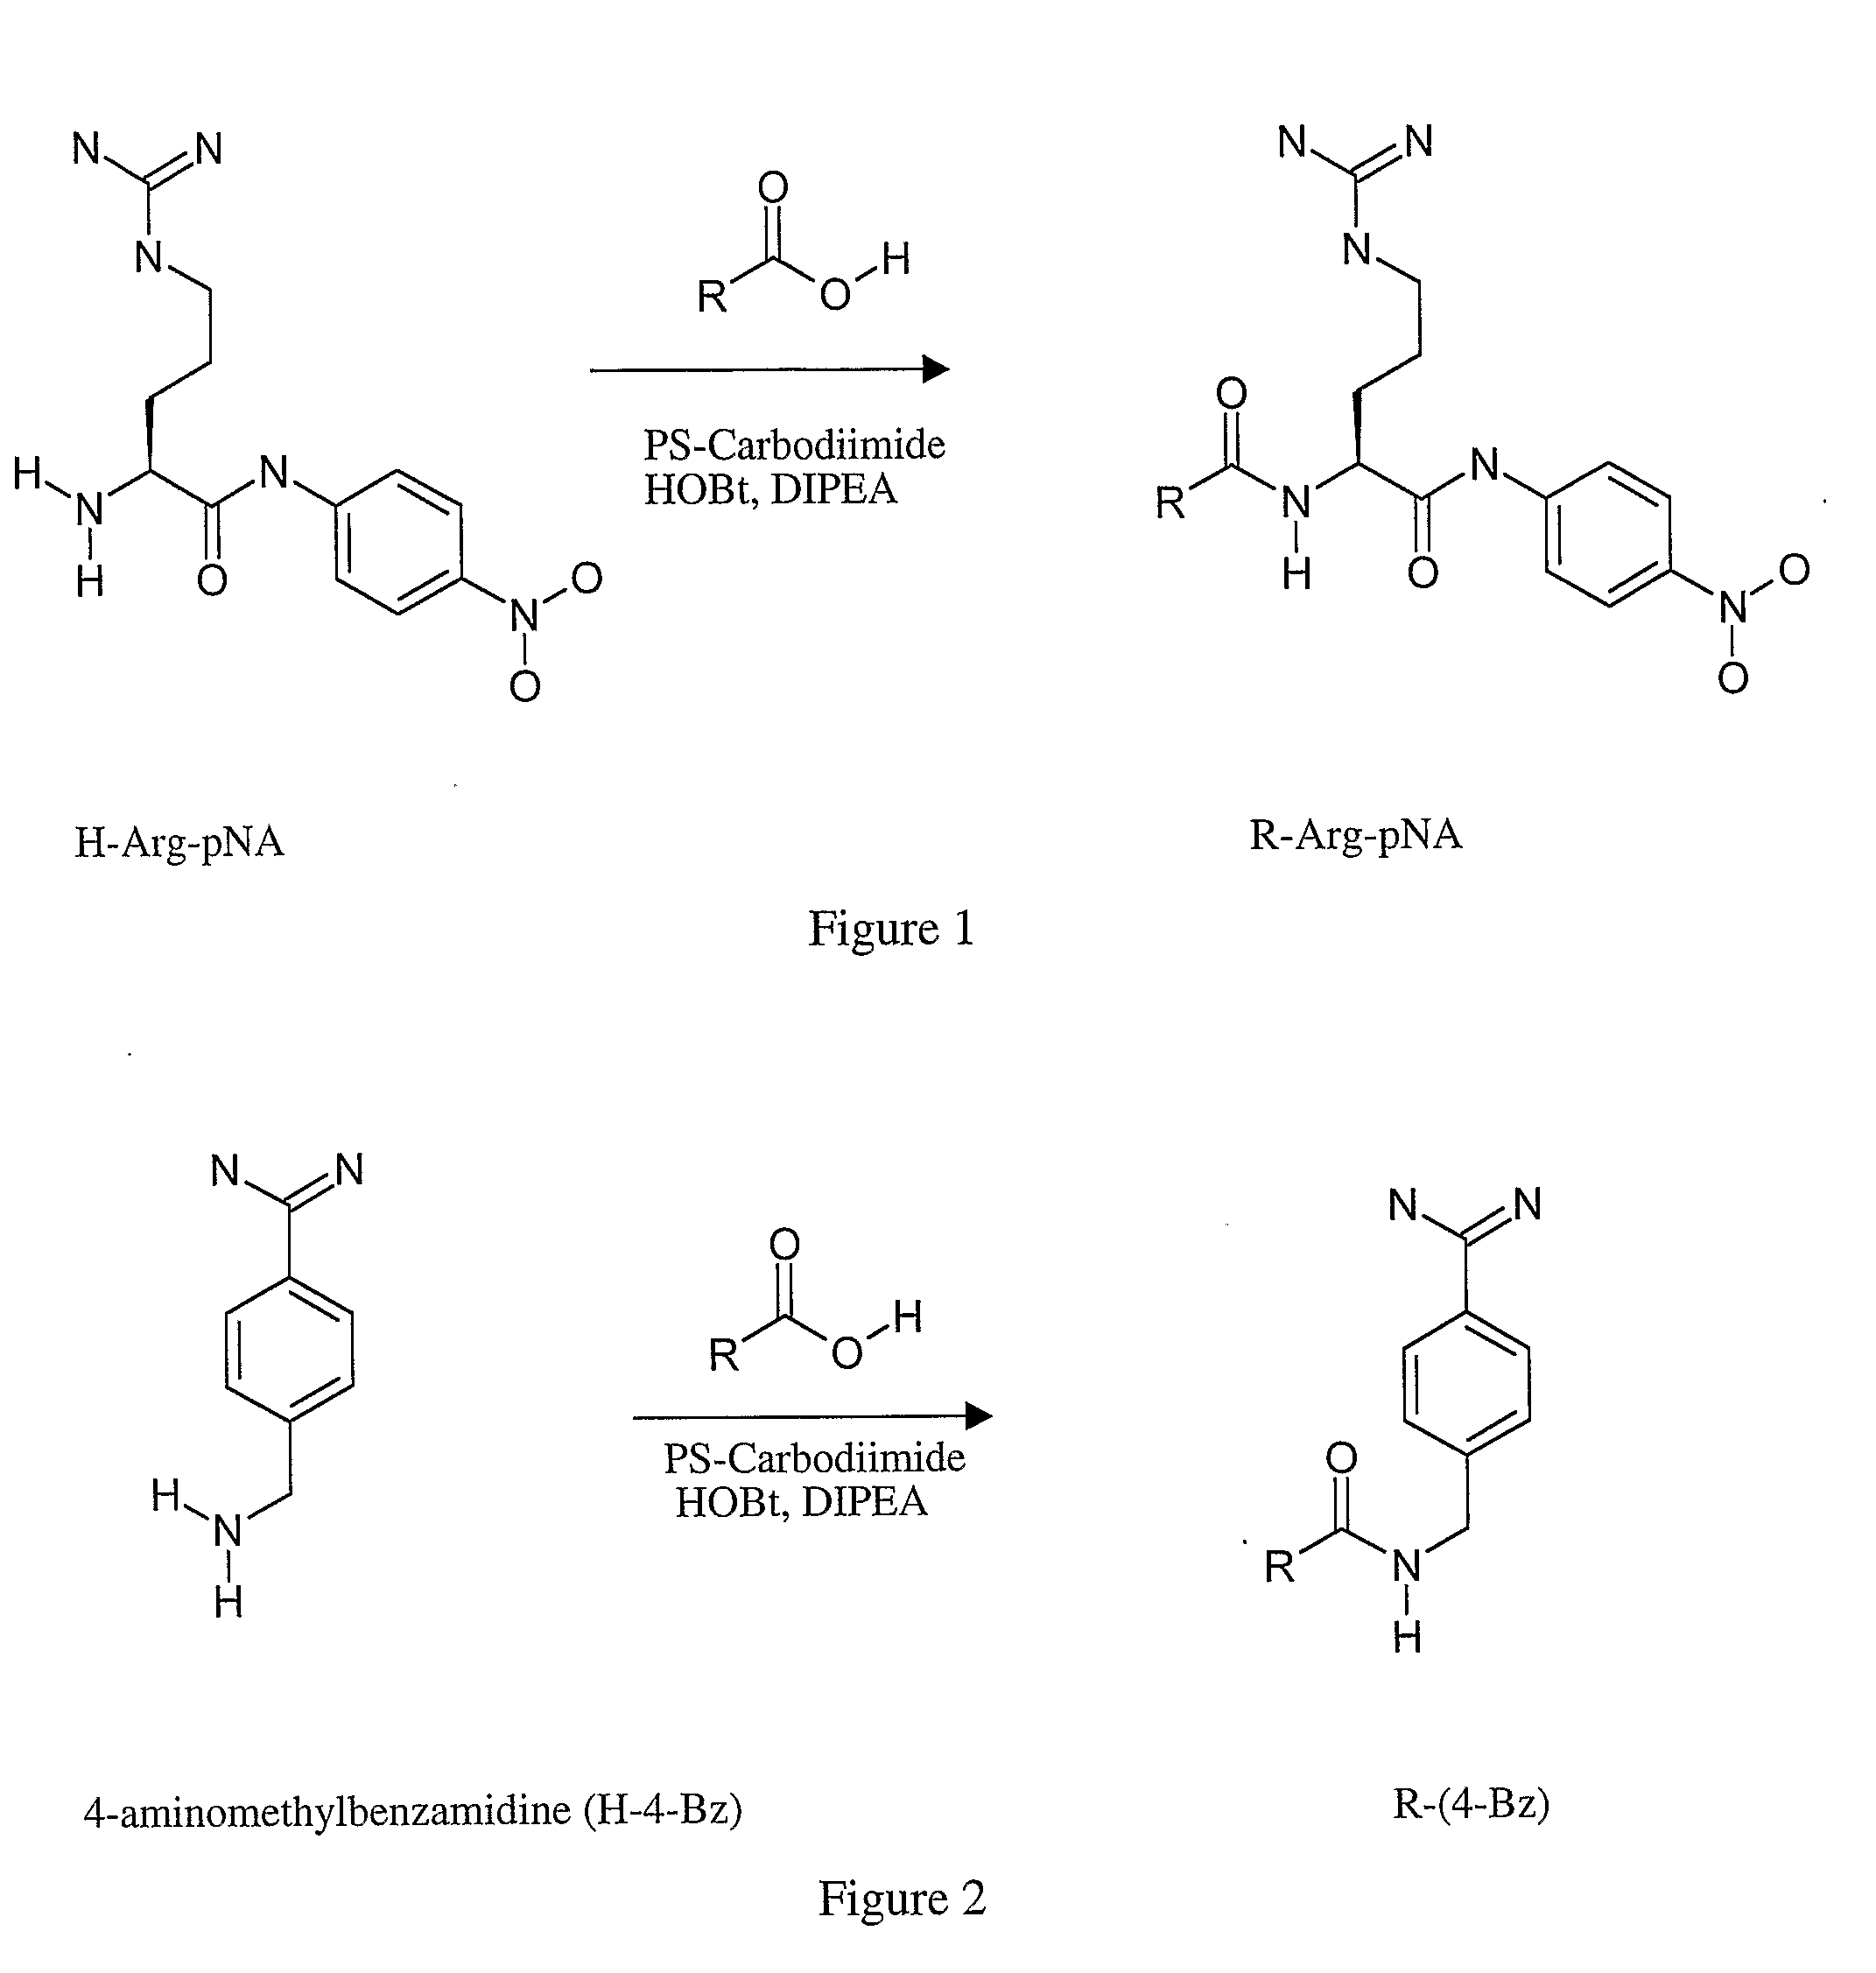 Methods for identification of inhibitors of enzyme activity